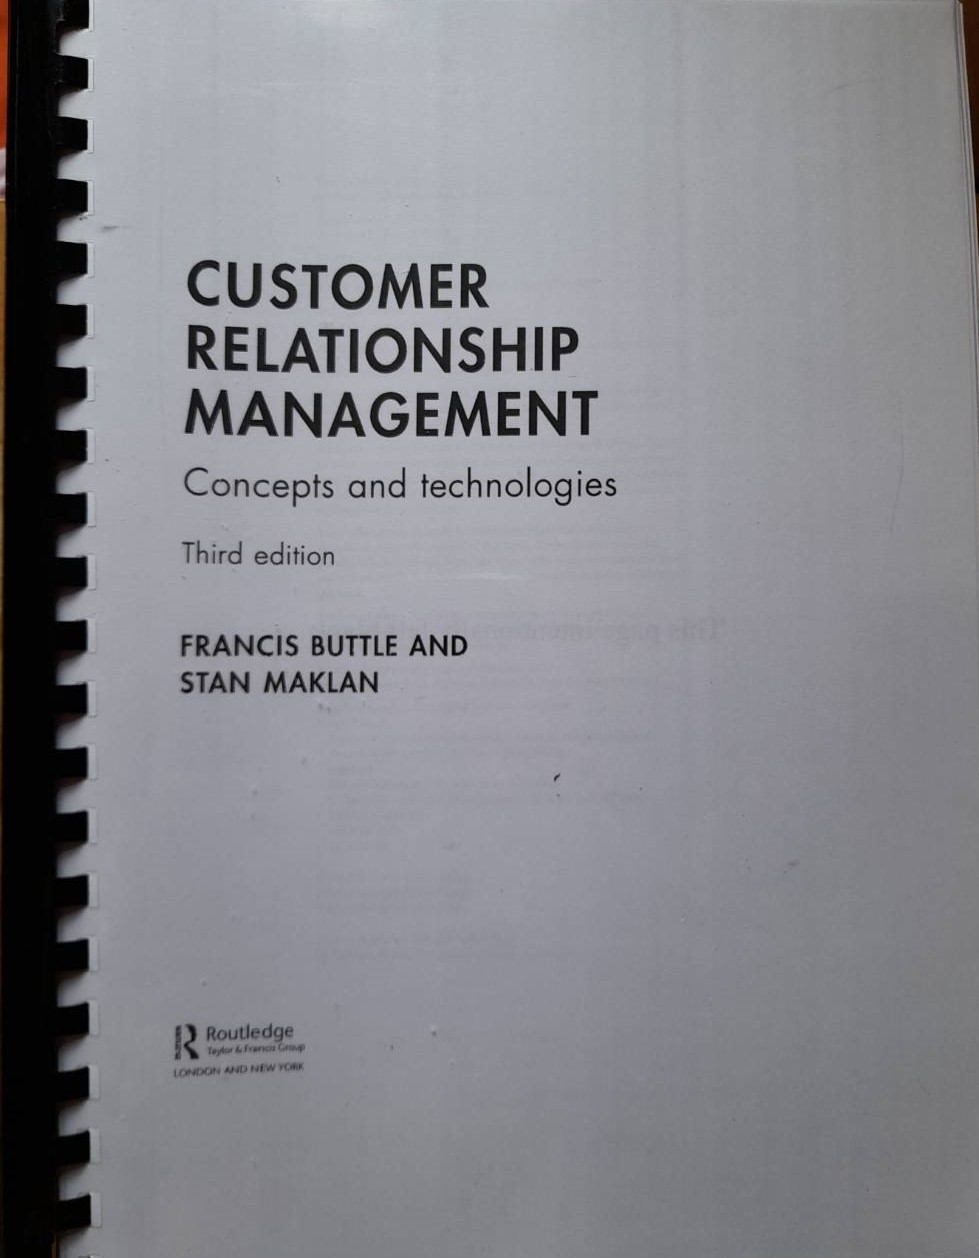 Customer Relationship Management: Concepts and Technologies, 3rd Edition  by Francis Buttle and Stan Maklan รูปที่ 1